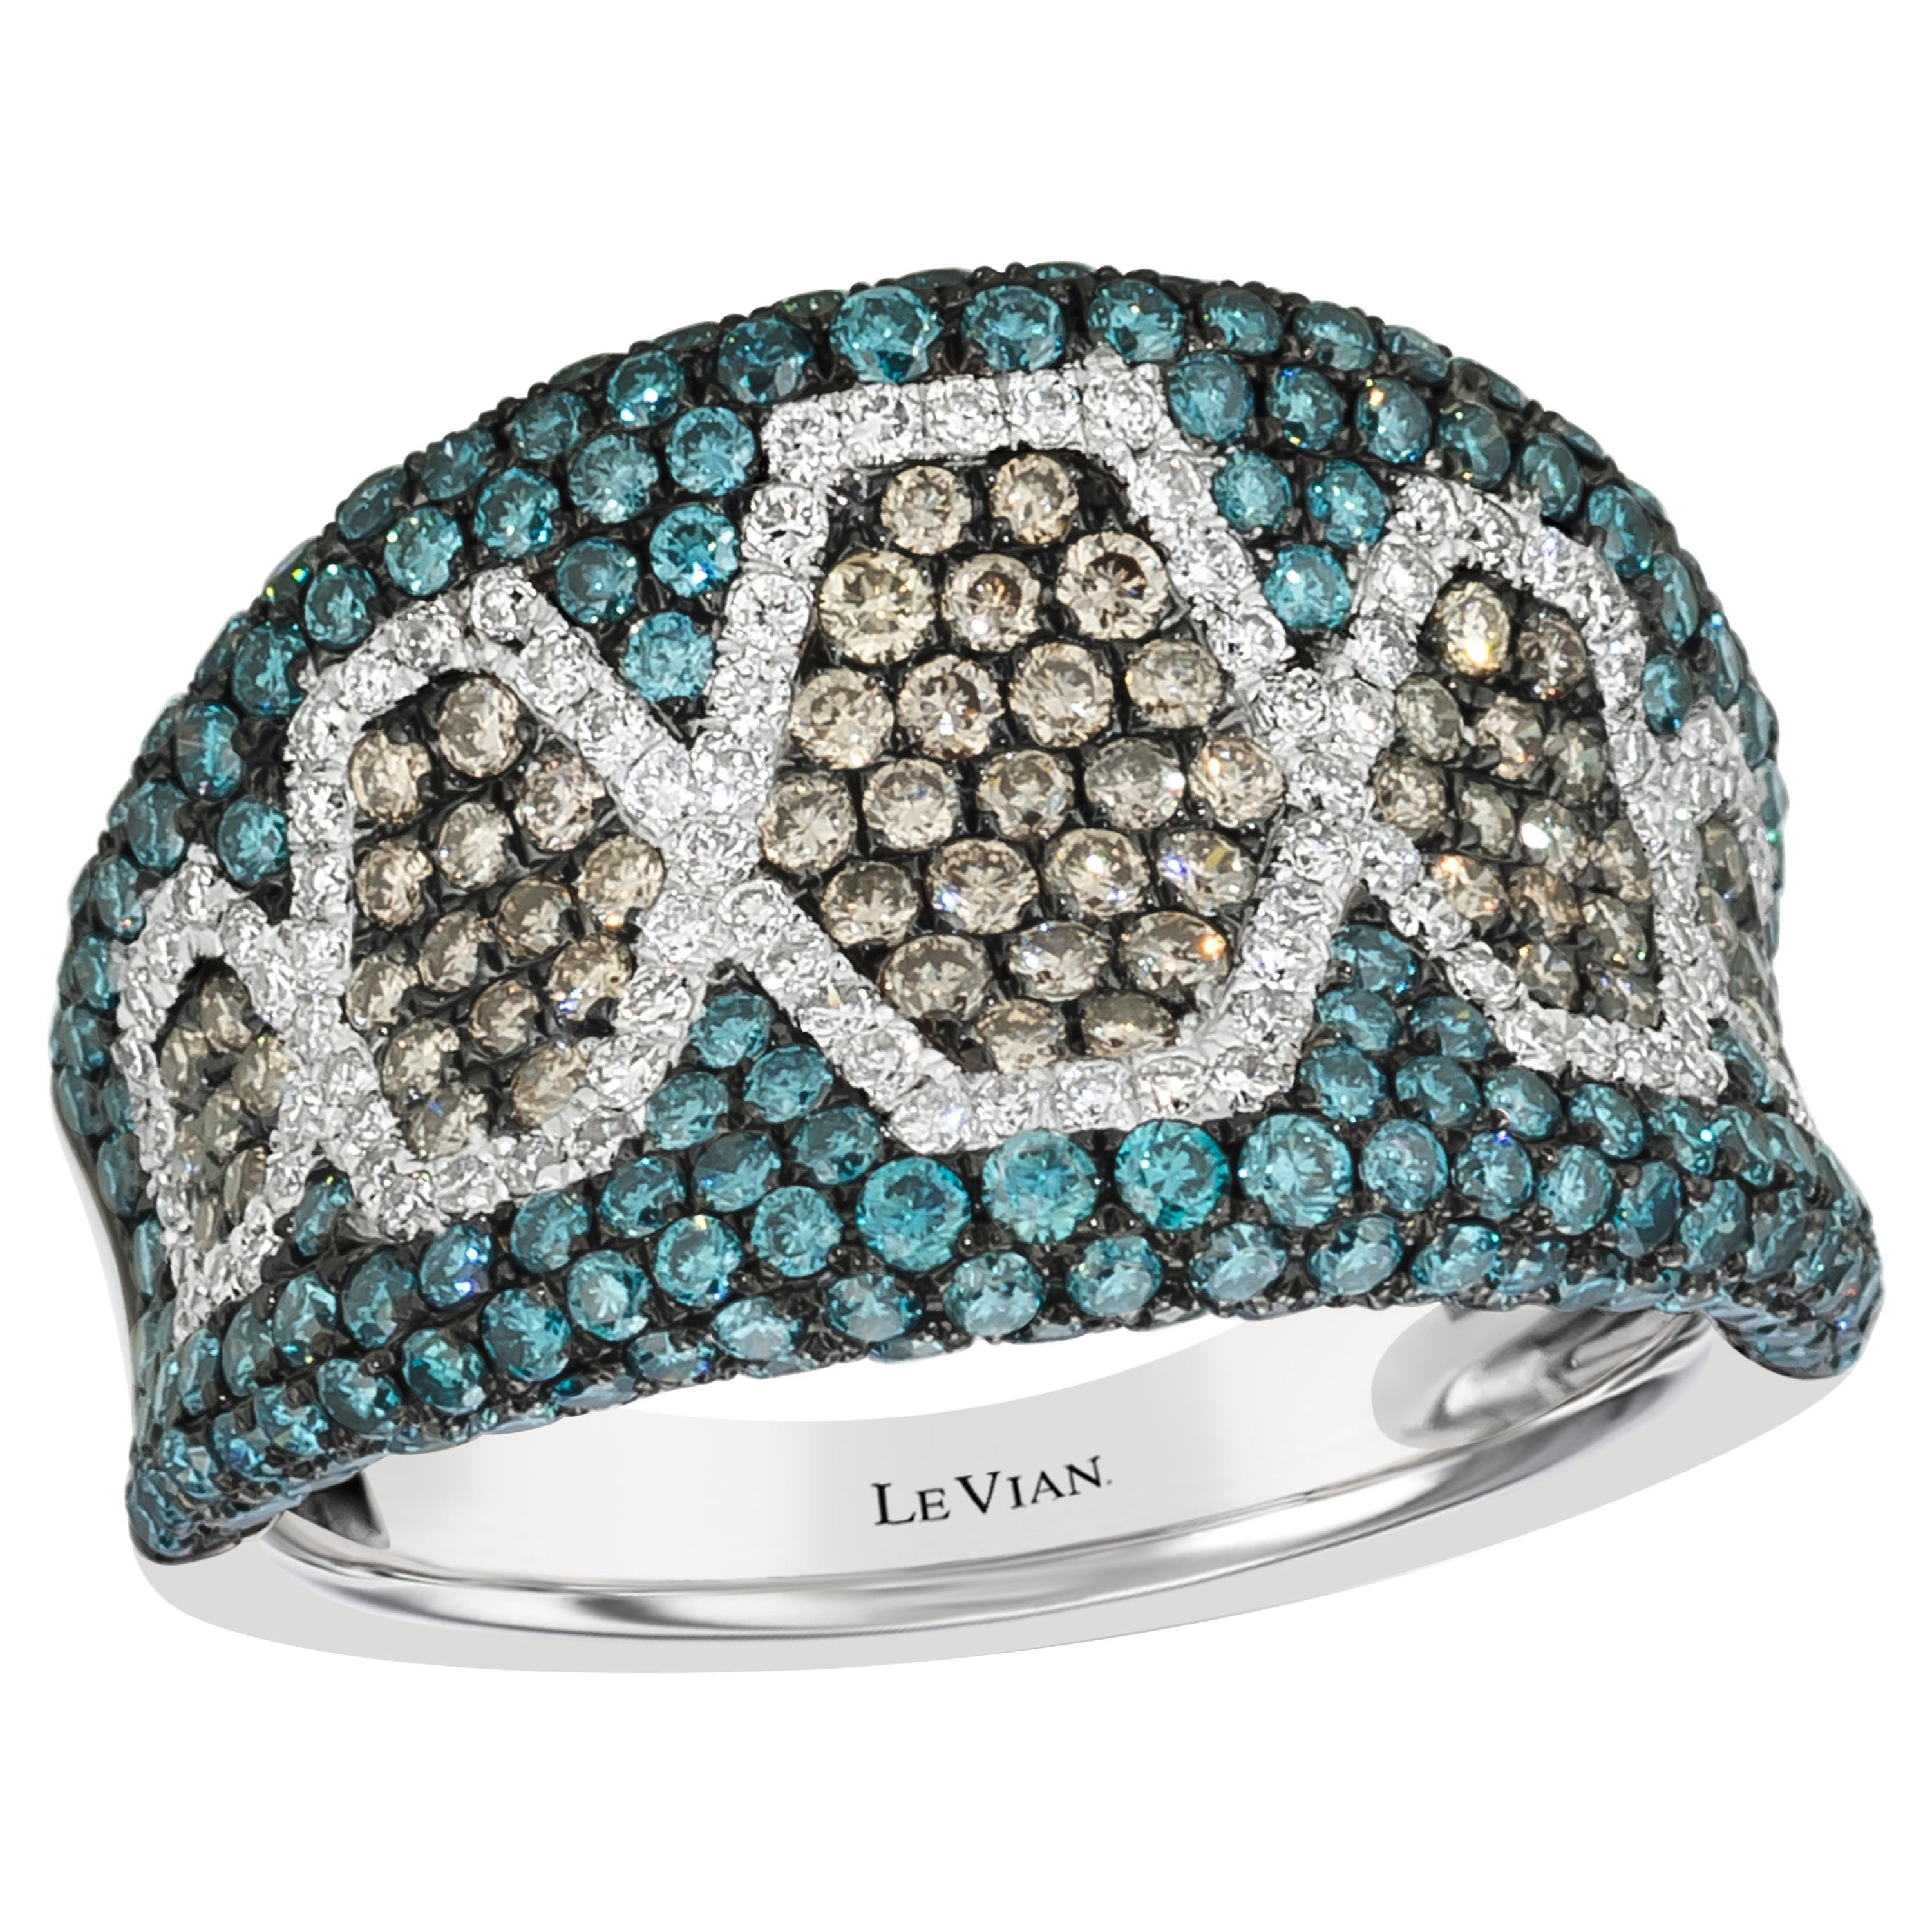 LeVian Ring Chocolate, Blue, and White Diamonds Set in 14K White Gold For Sale